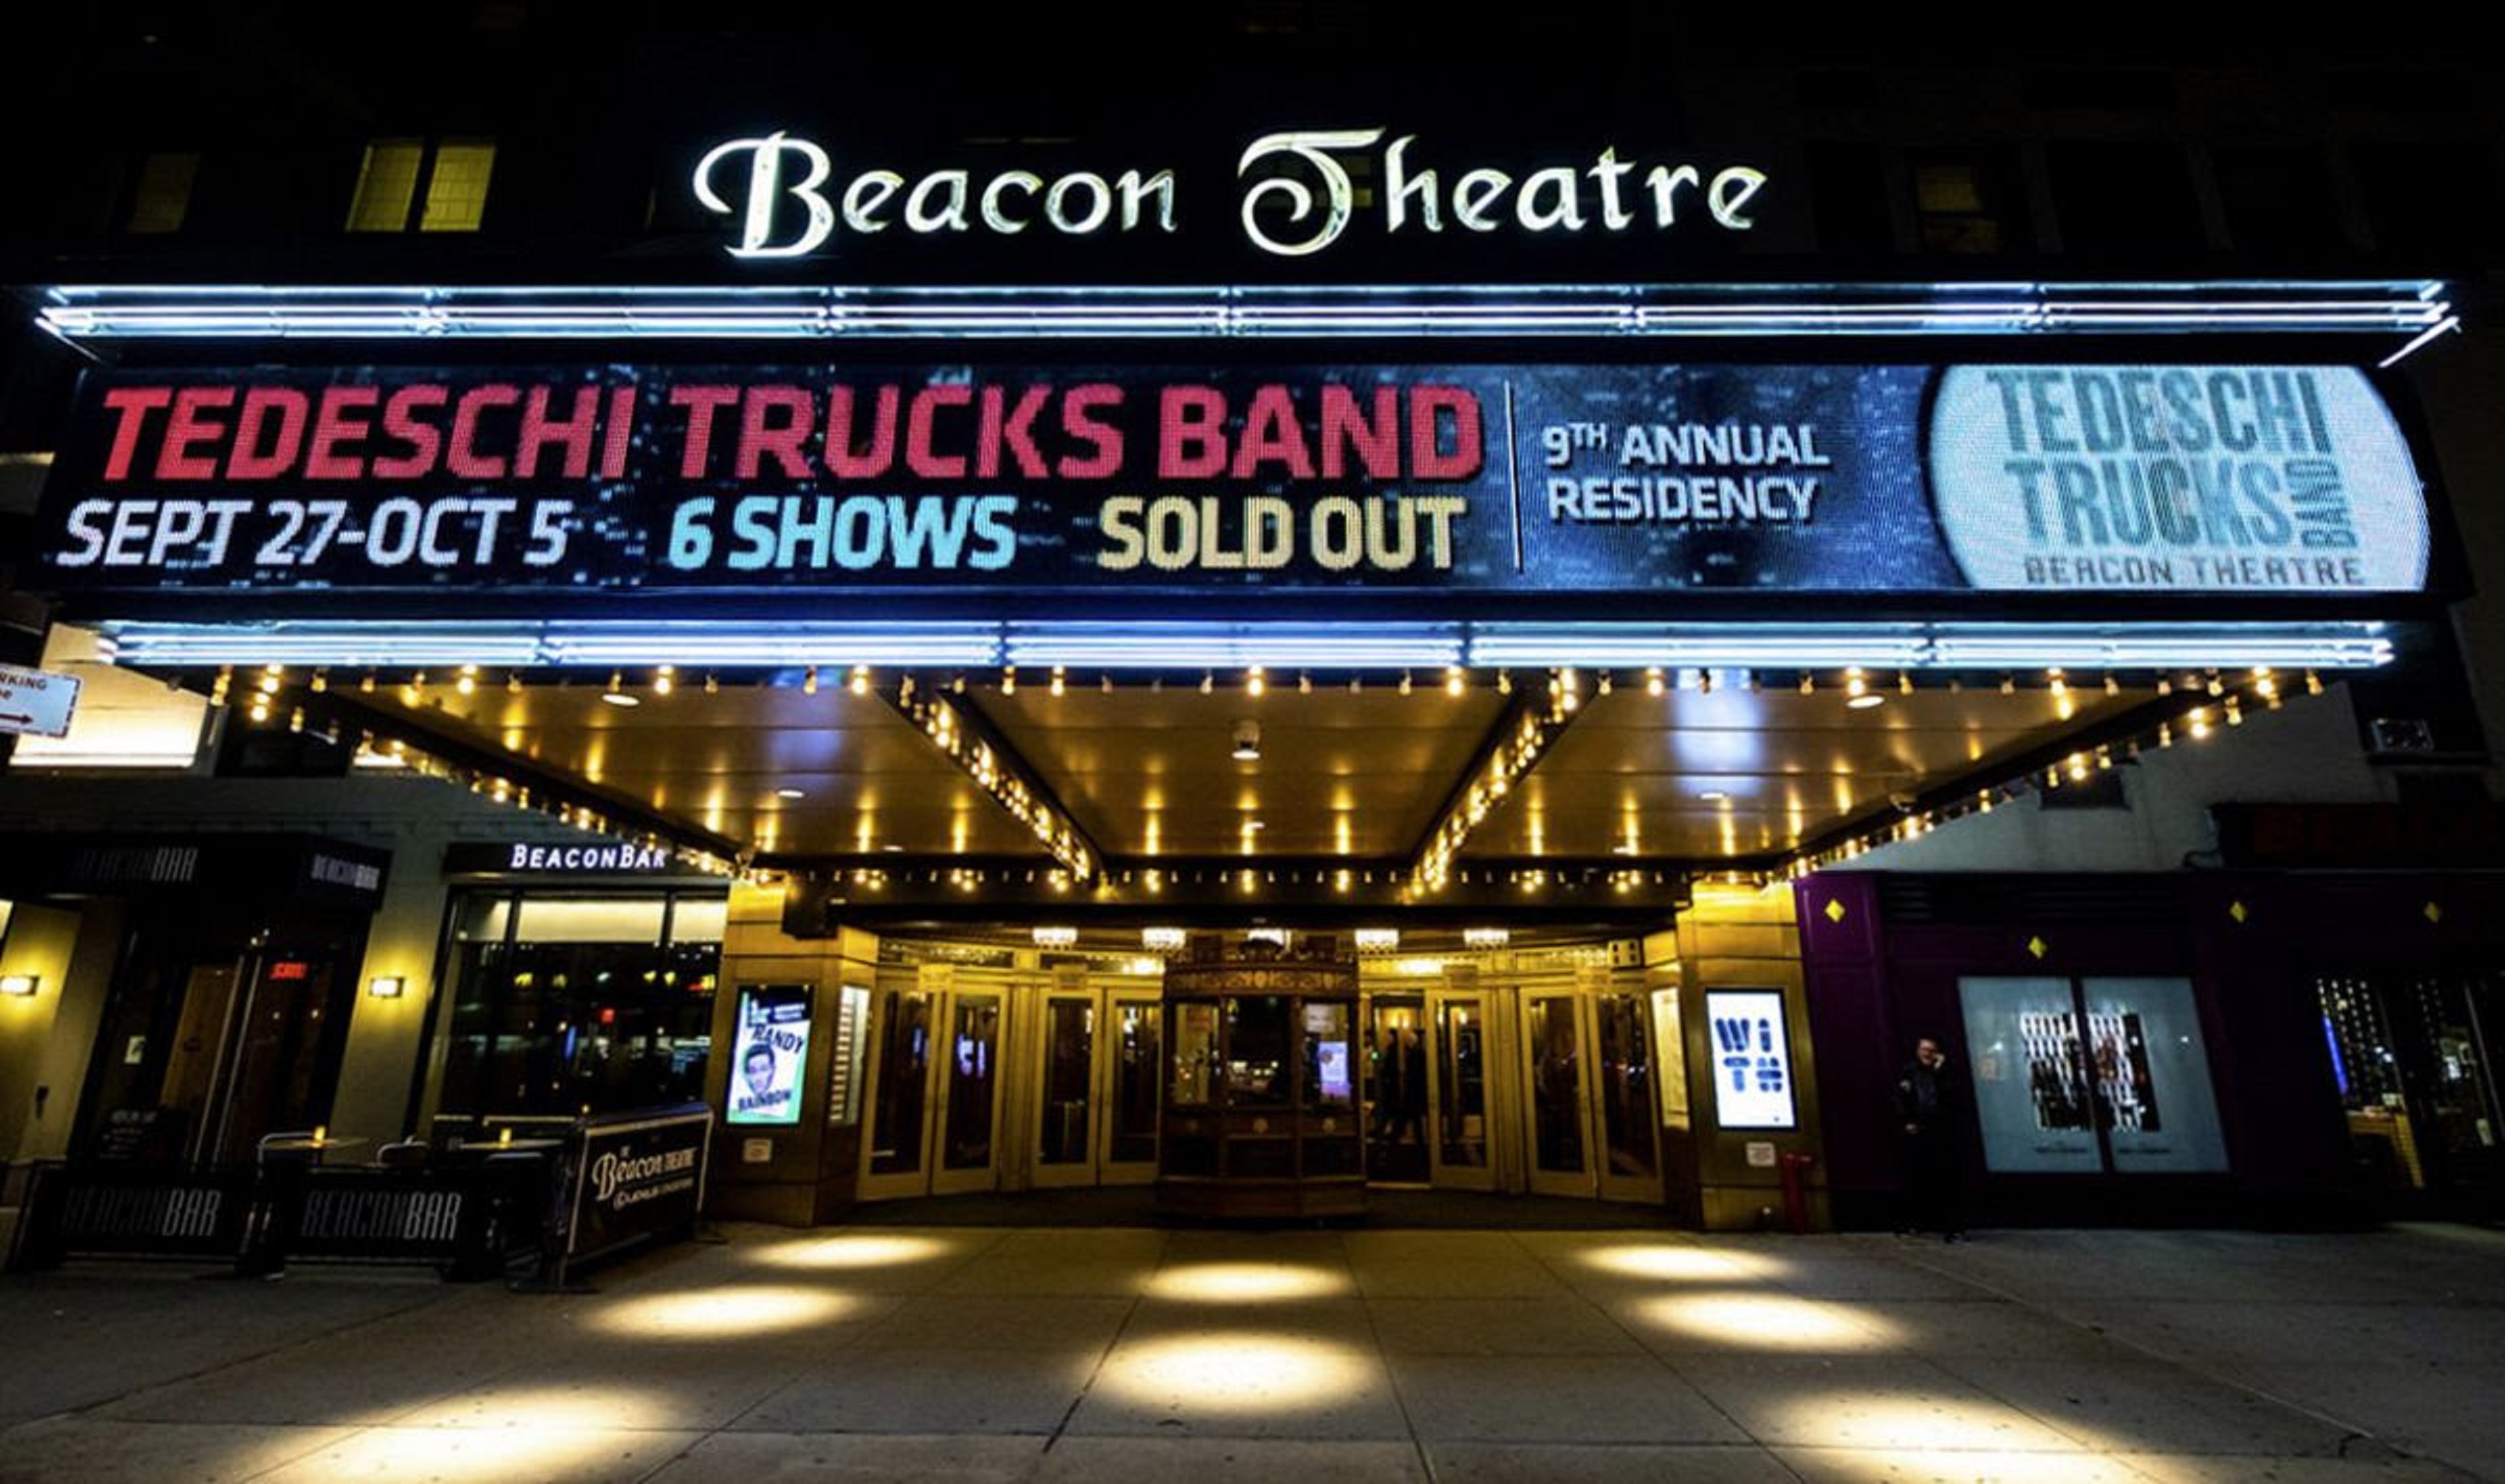 TEDESCHI TRUCKS BAND Announces Beacon Theatre Pay-Per-View Re-Broadcasts Oct 22 & 29